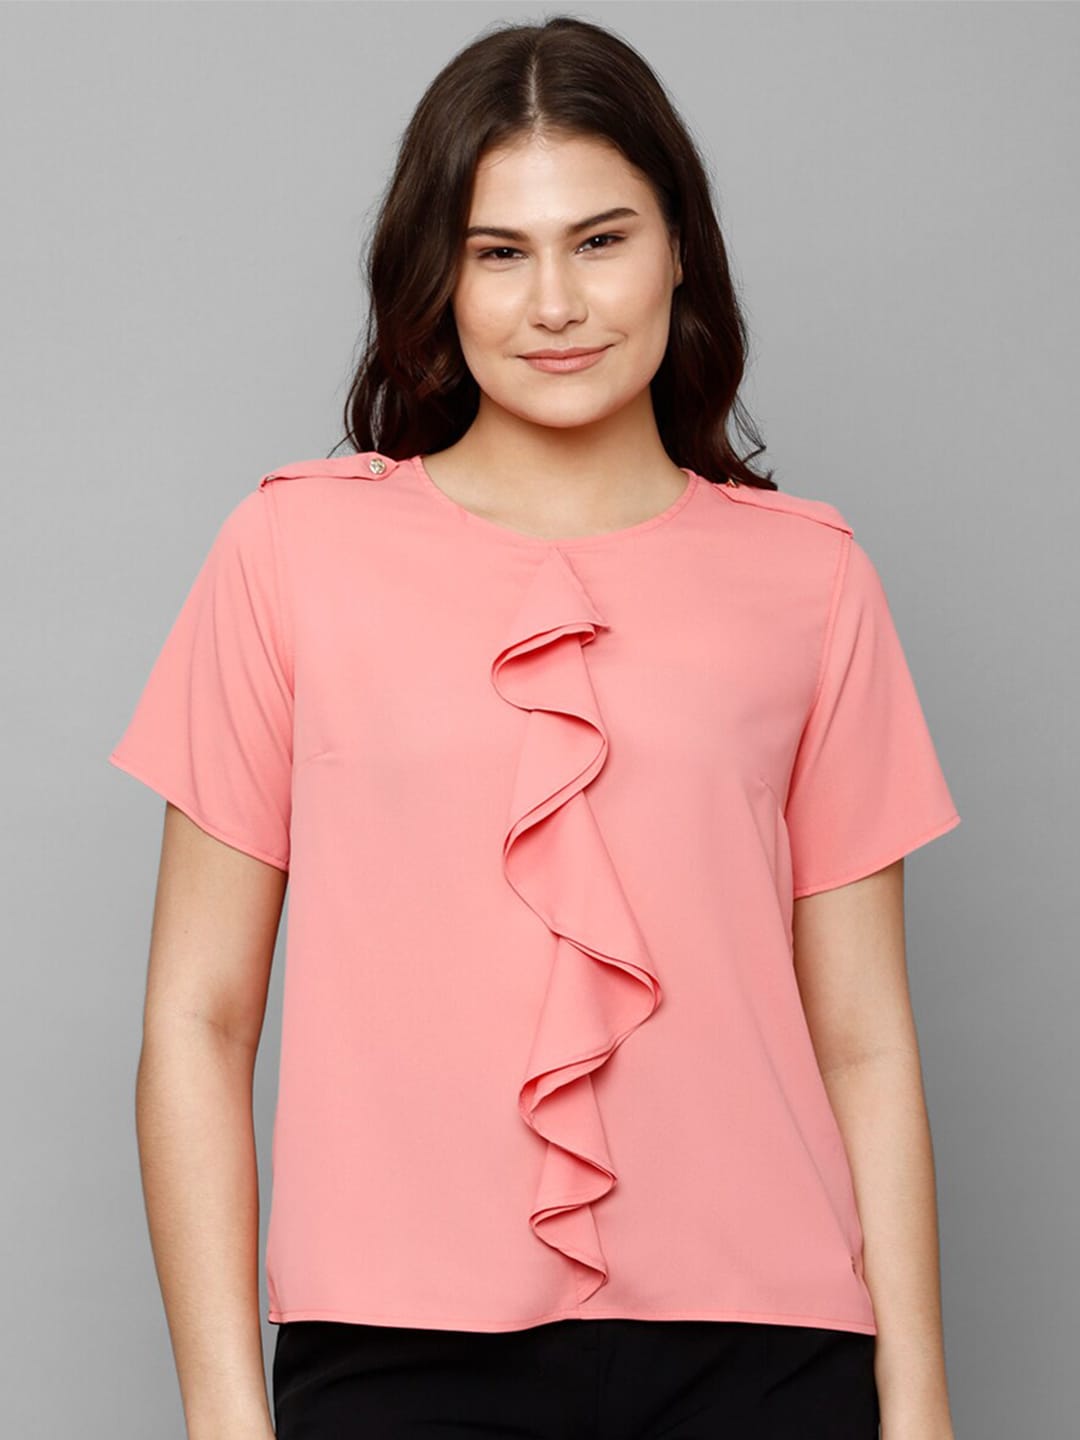 Allen Solly Woman Round Neck Ruffles Top Price in India